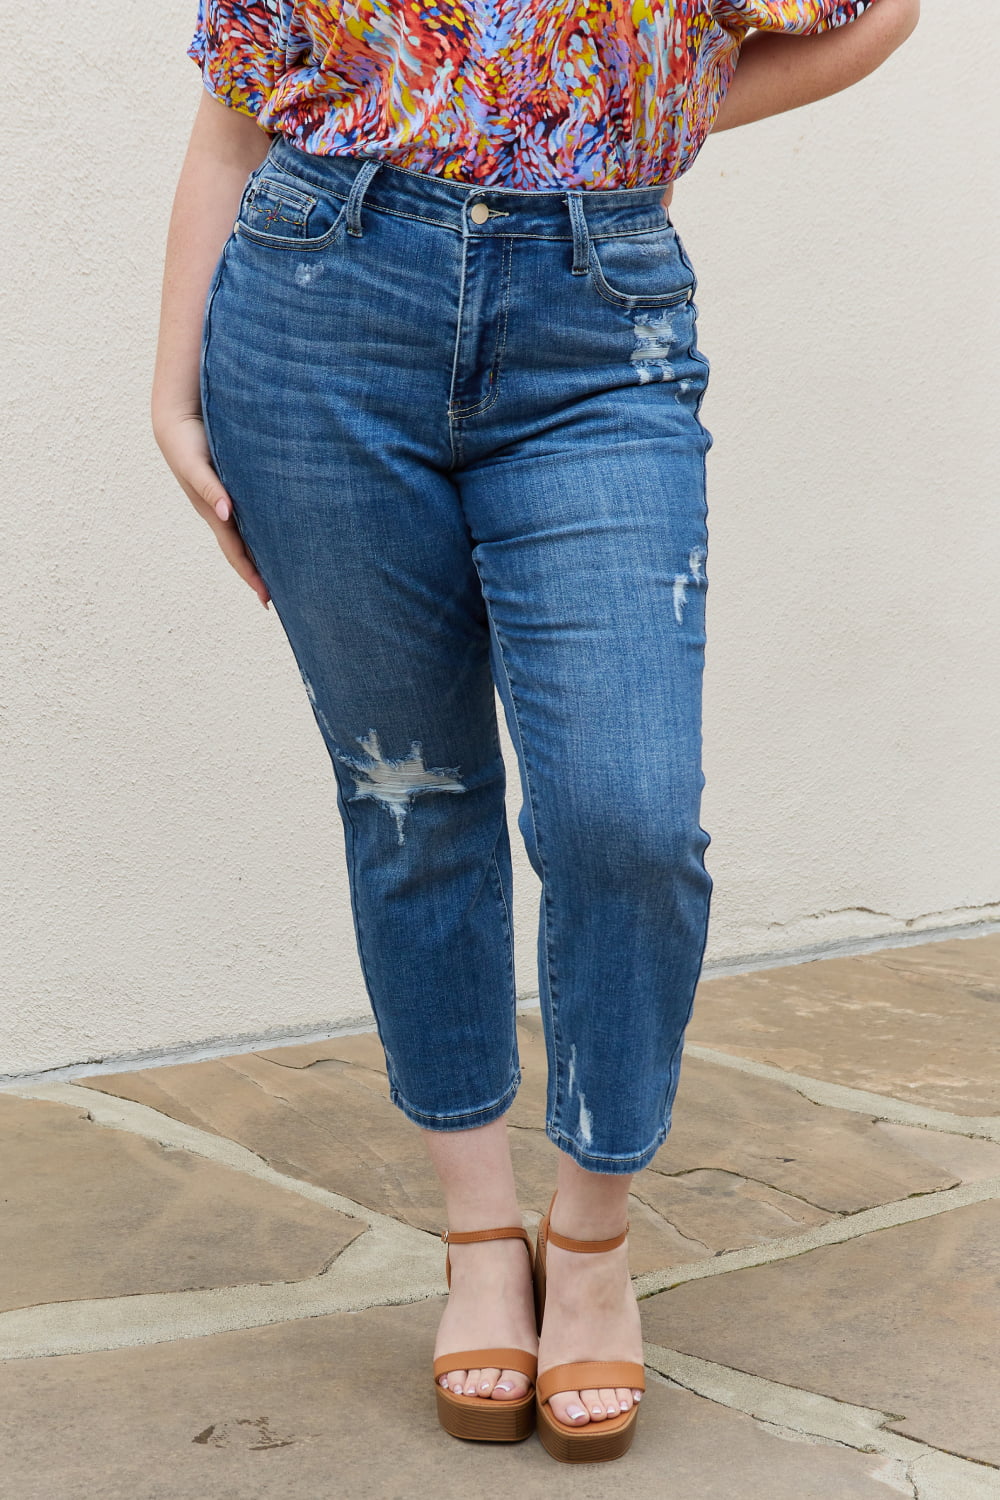 Judy Blue High Waisted Straight Jeans - AnnRose Boutique